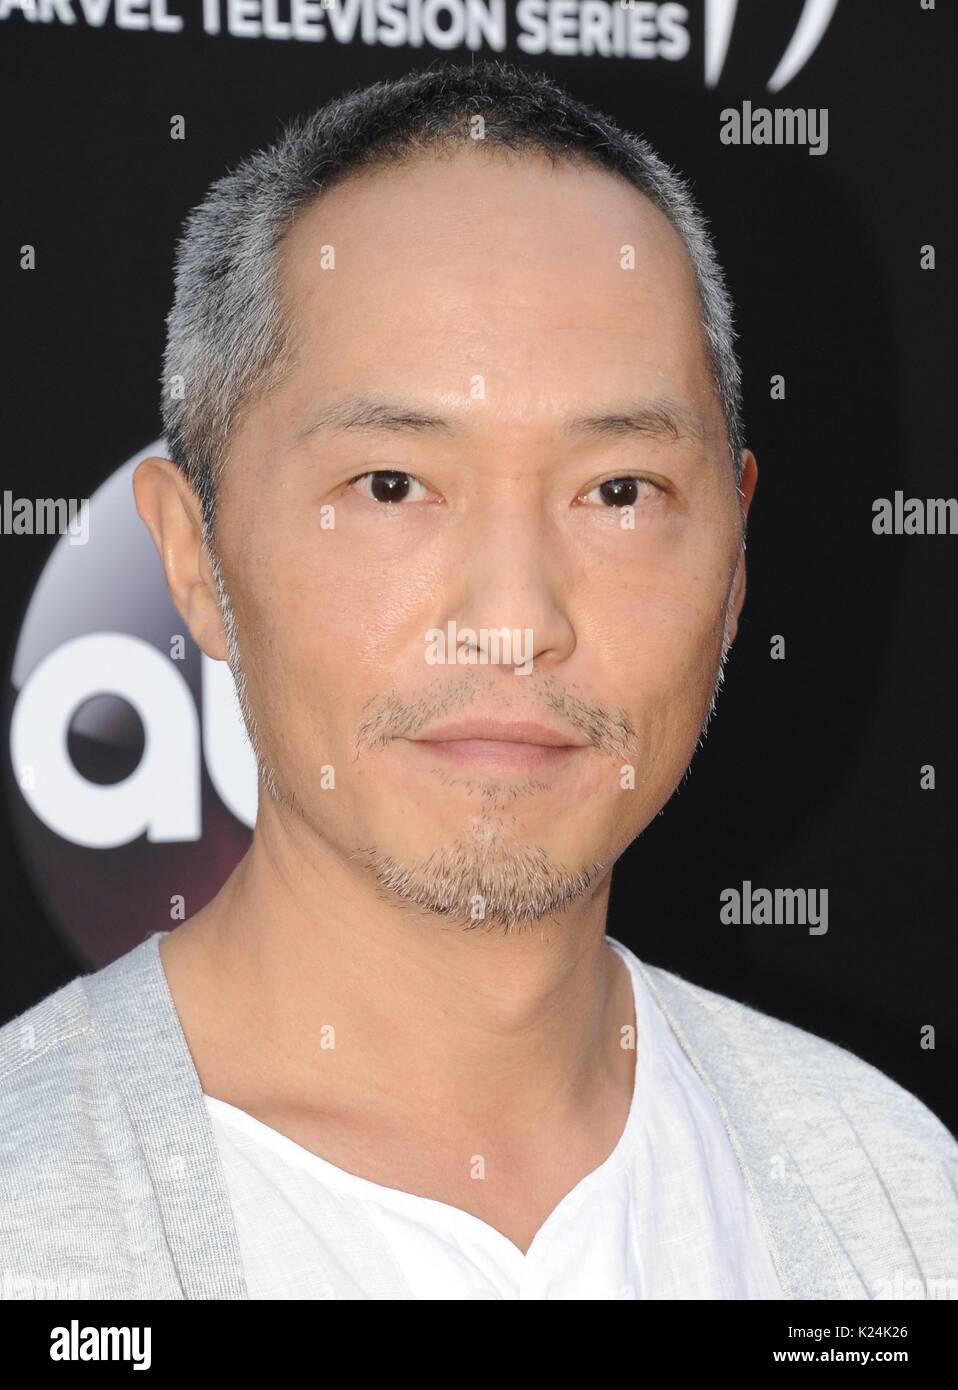 Los Angeles, CA, USA. 28th Aug, 2017. Ken Leung at arrivals for MARVEL'S INHUMANS Series Premiere, Universal CityWalk, Los Angeles, CA August 28, 2017. Credit: Dee Cercone/Everett Collection/Alamy Live News Stock Photo